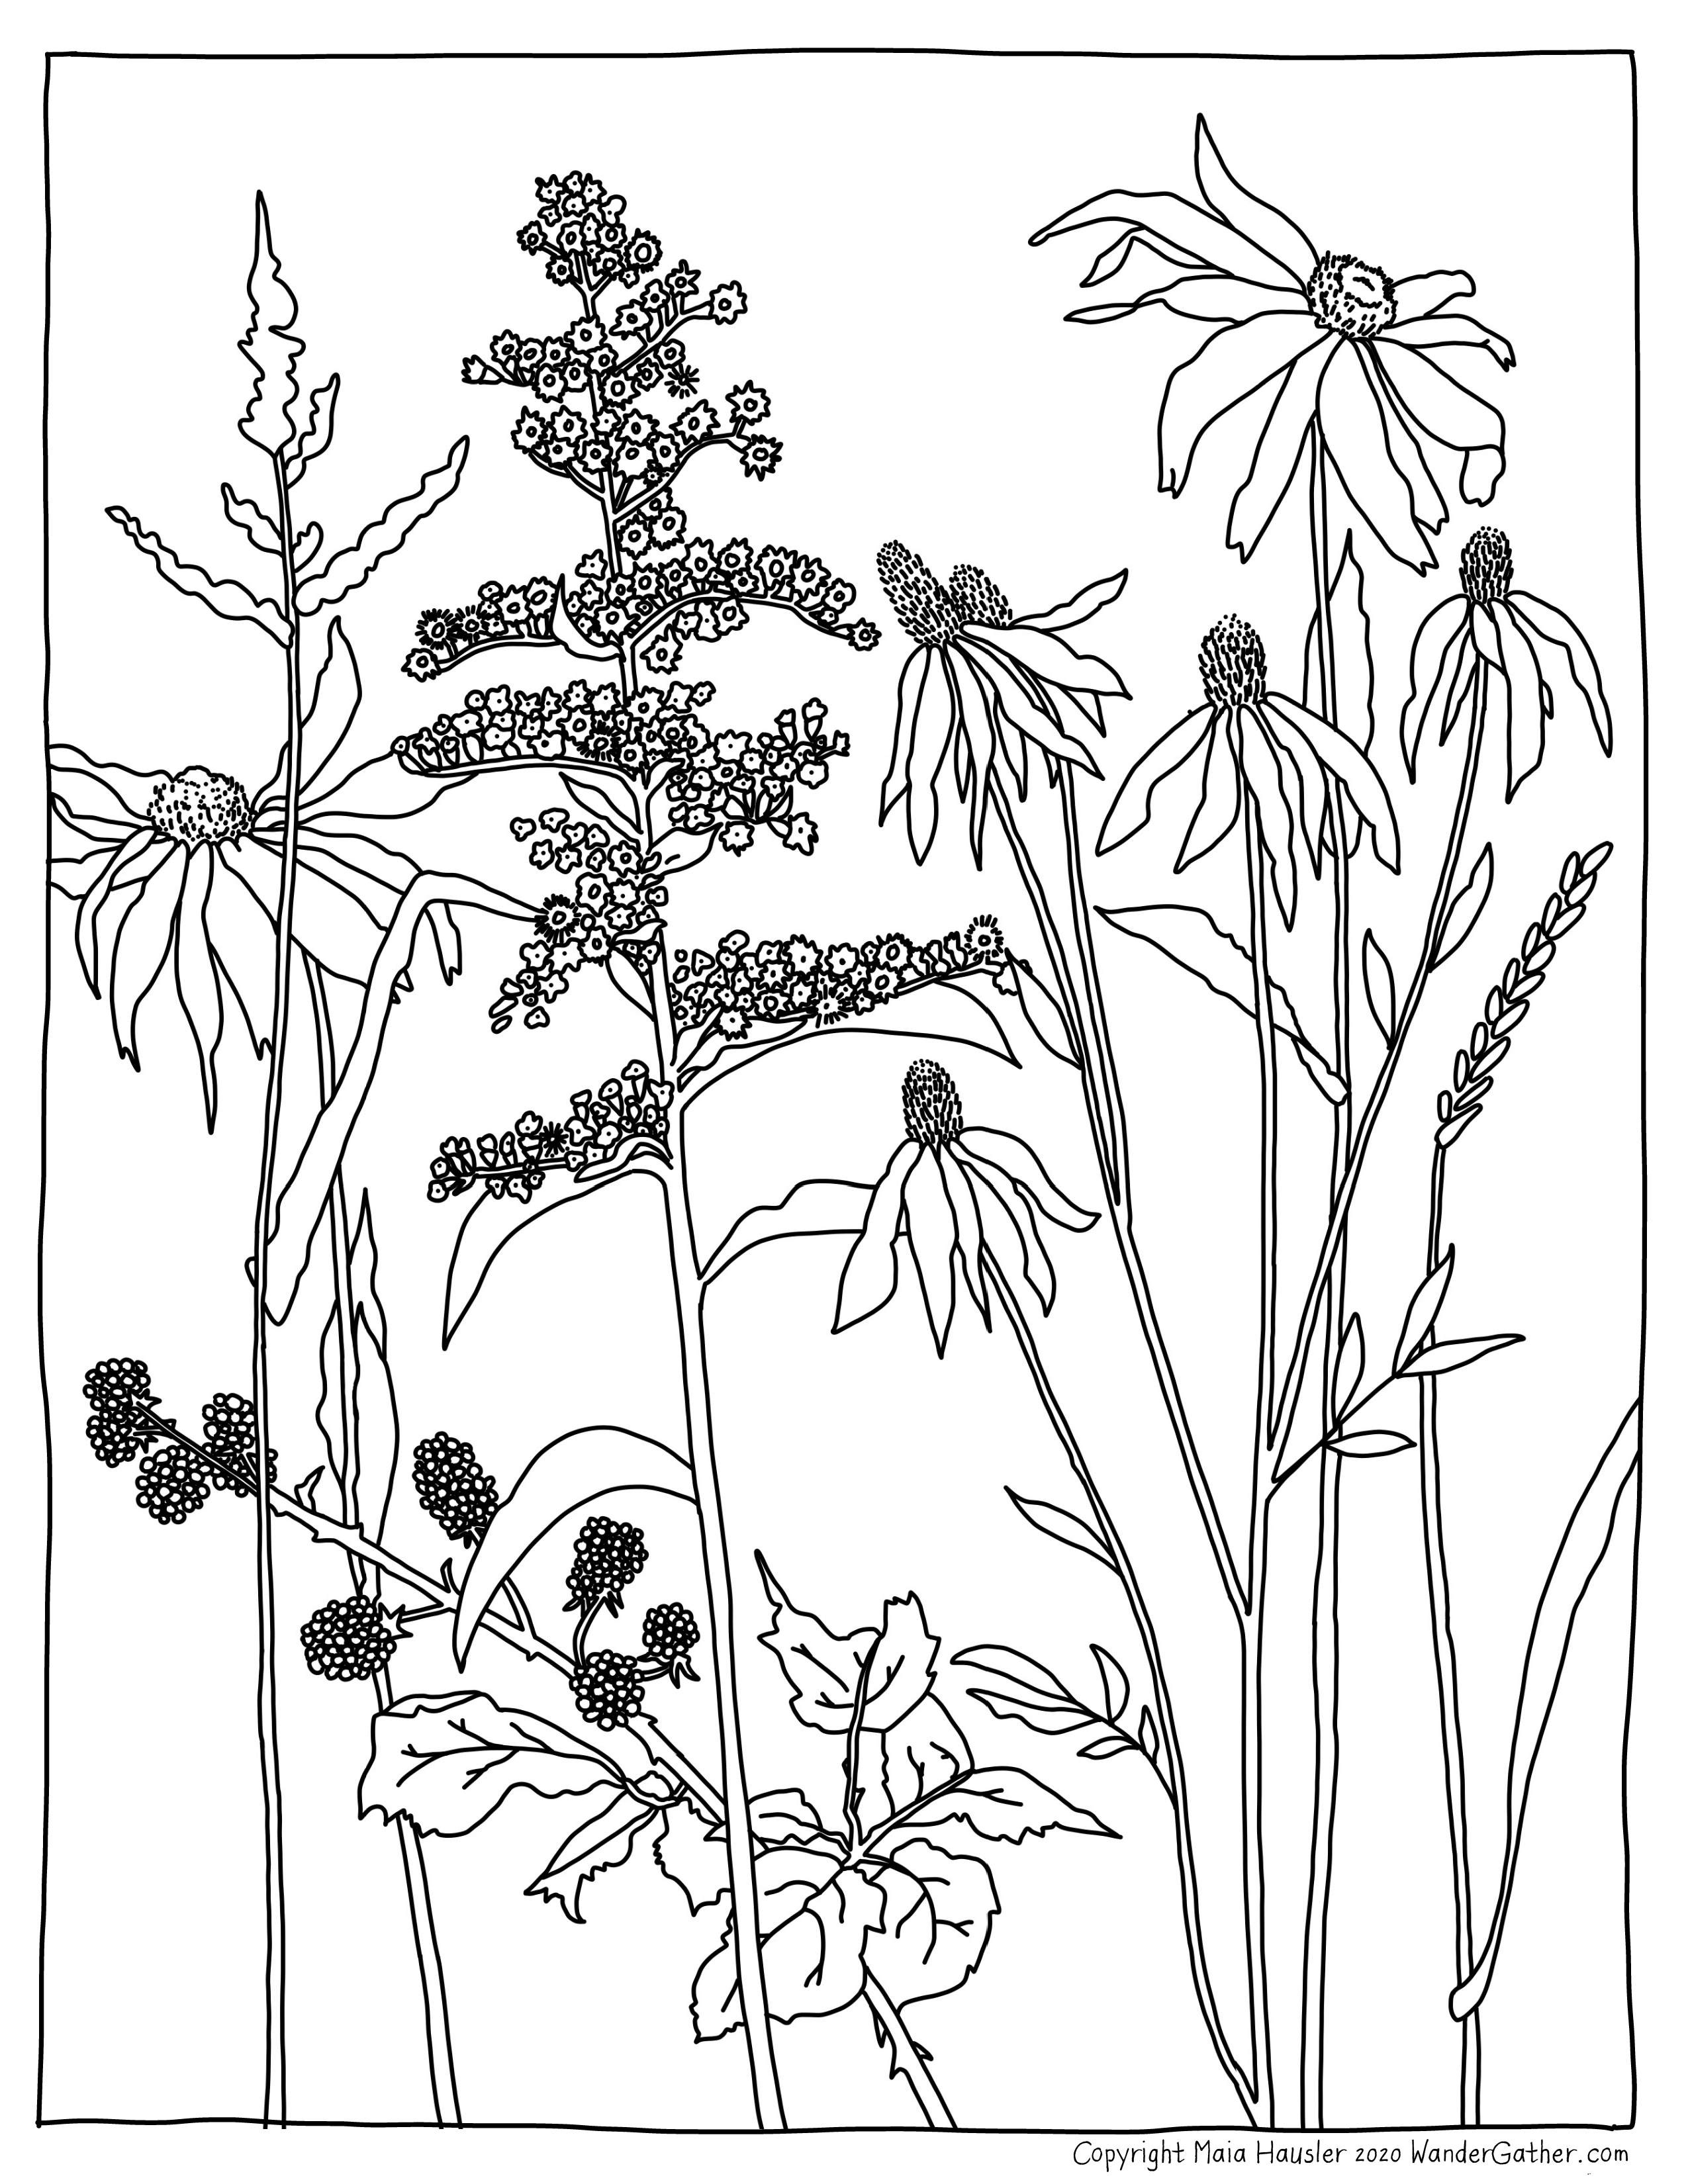 Coloring pages â maia hausler illustration